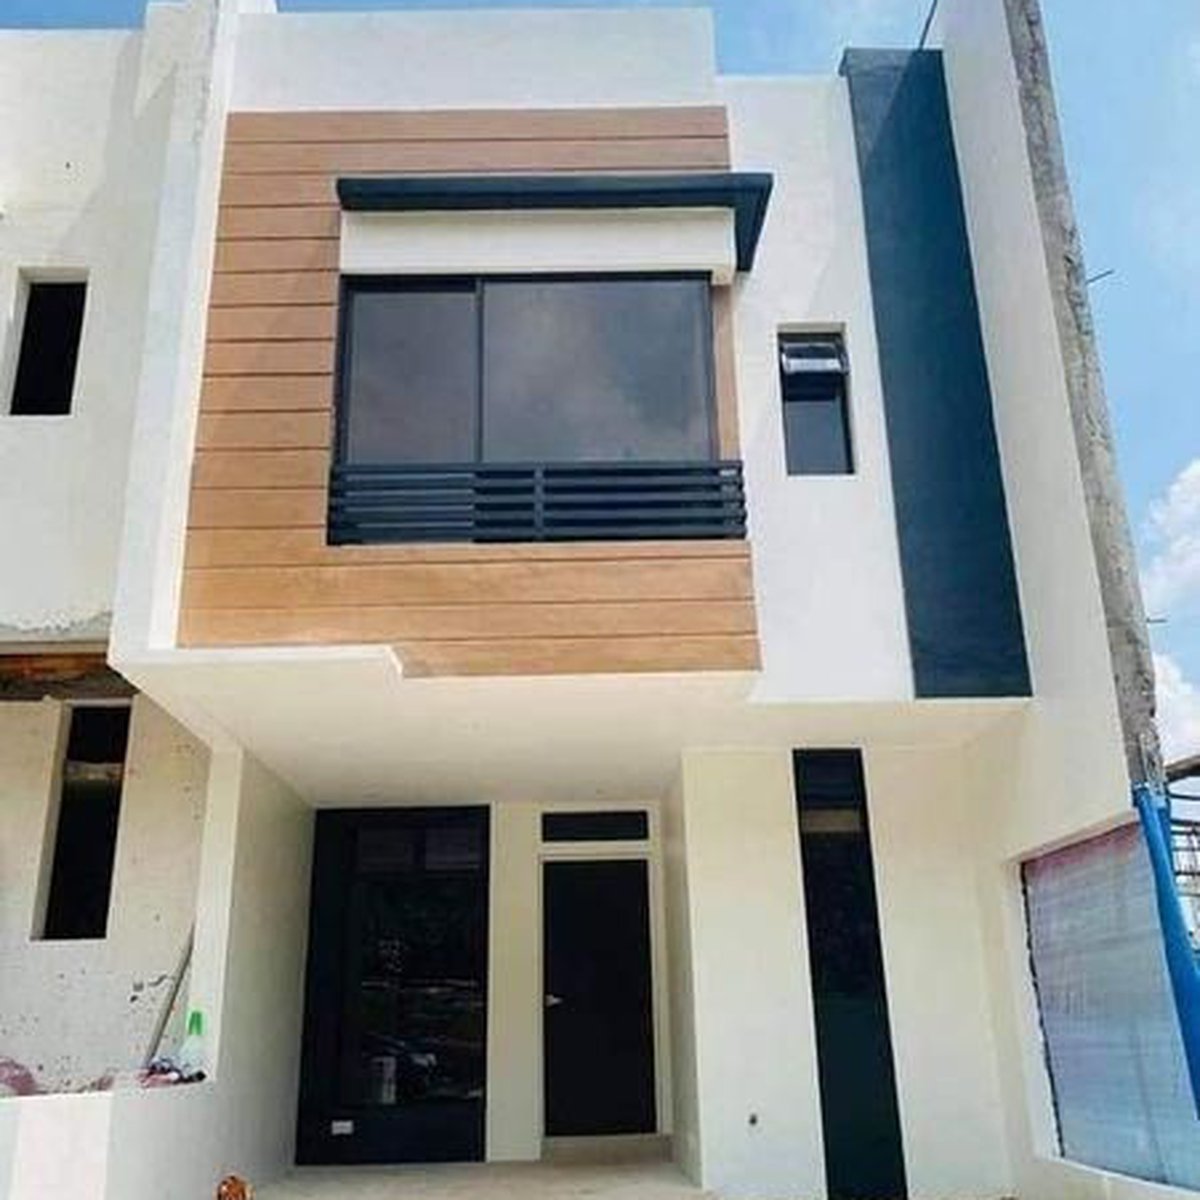 3BEDROOM TOWNHOUSE FOR SALE IN ANTIPOLO RIZAL